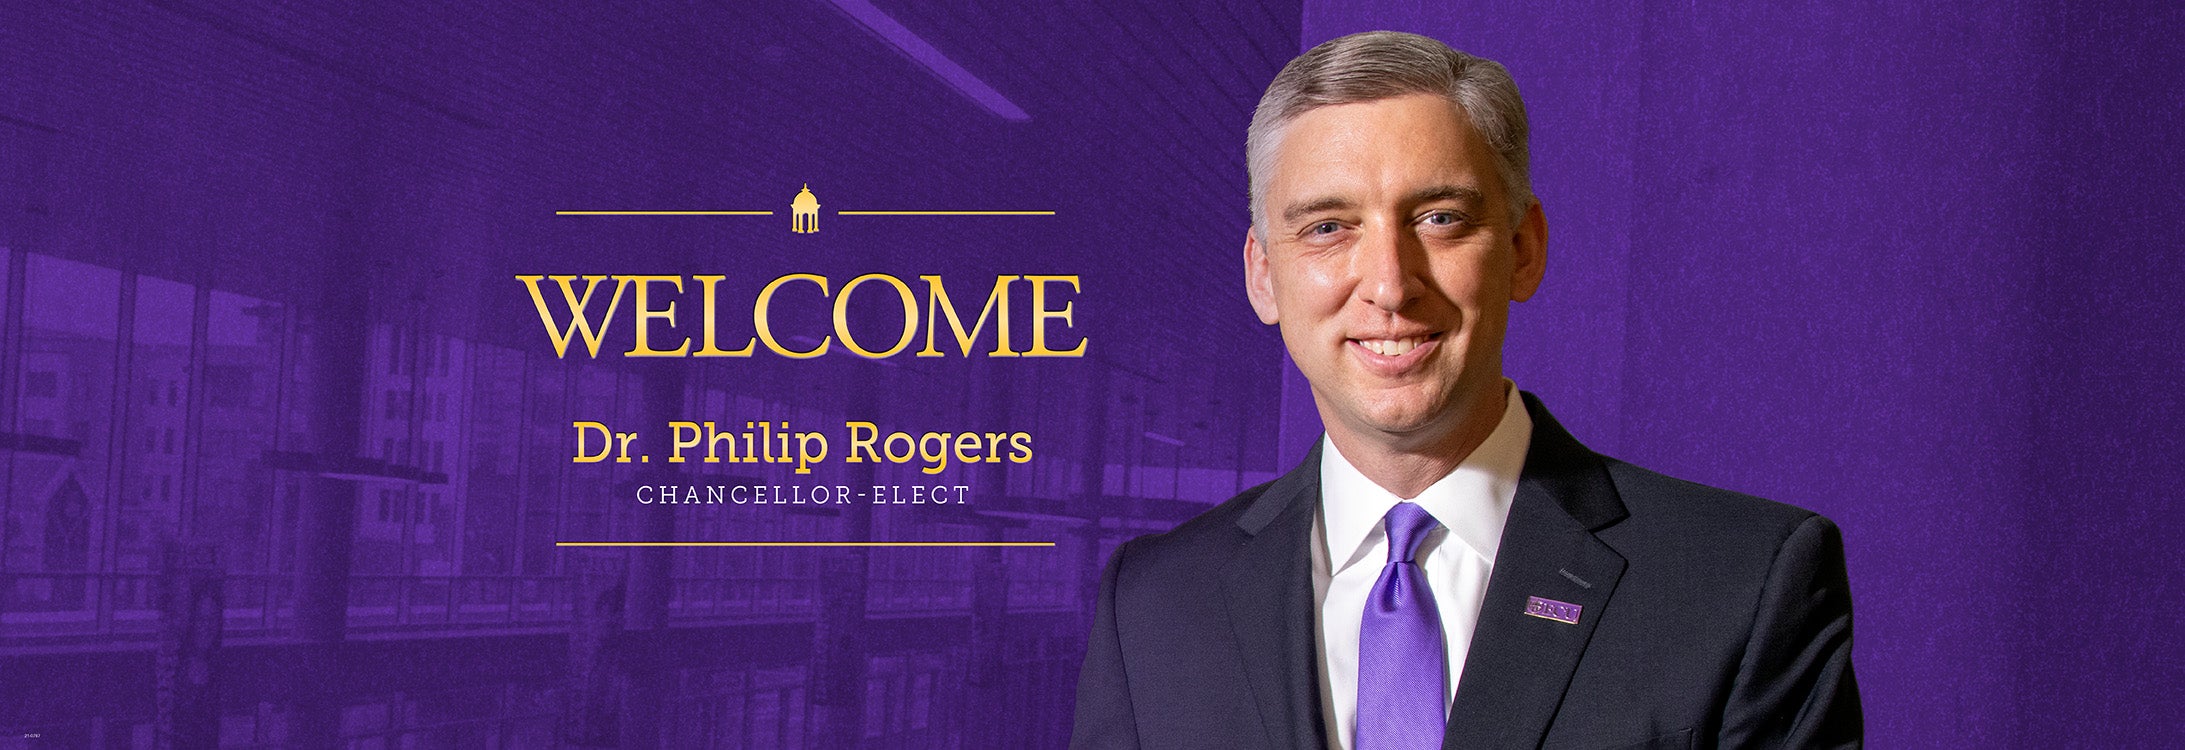 Welcome Dr. Philip Rogers, Chancellor-Elect